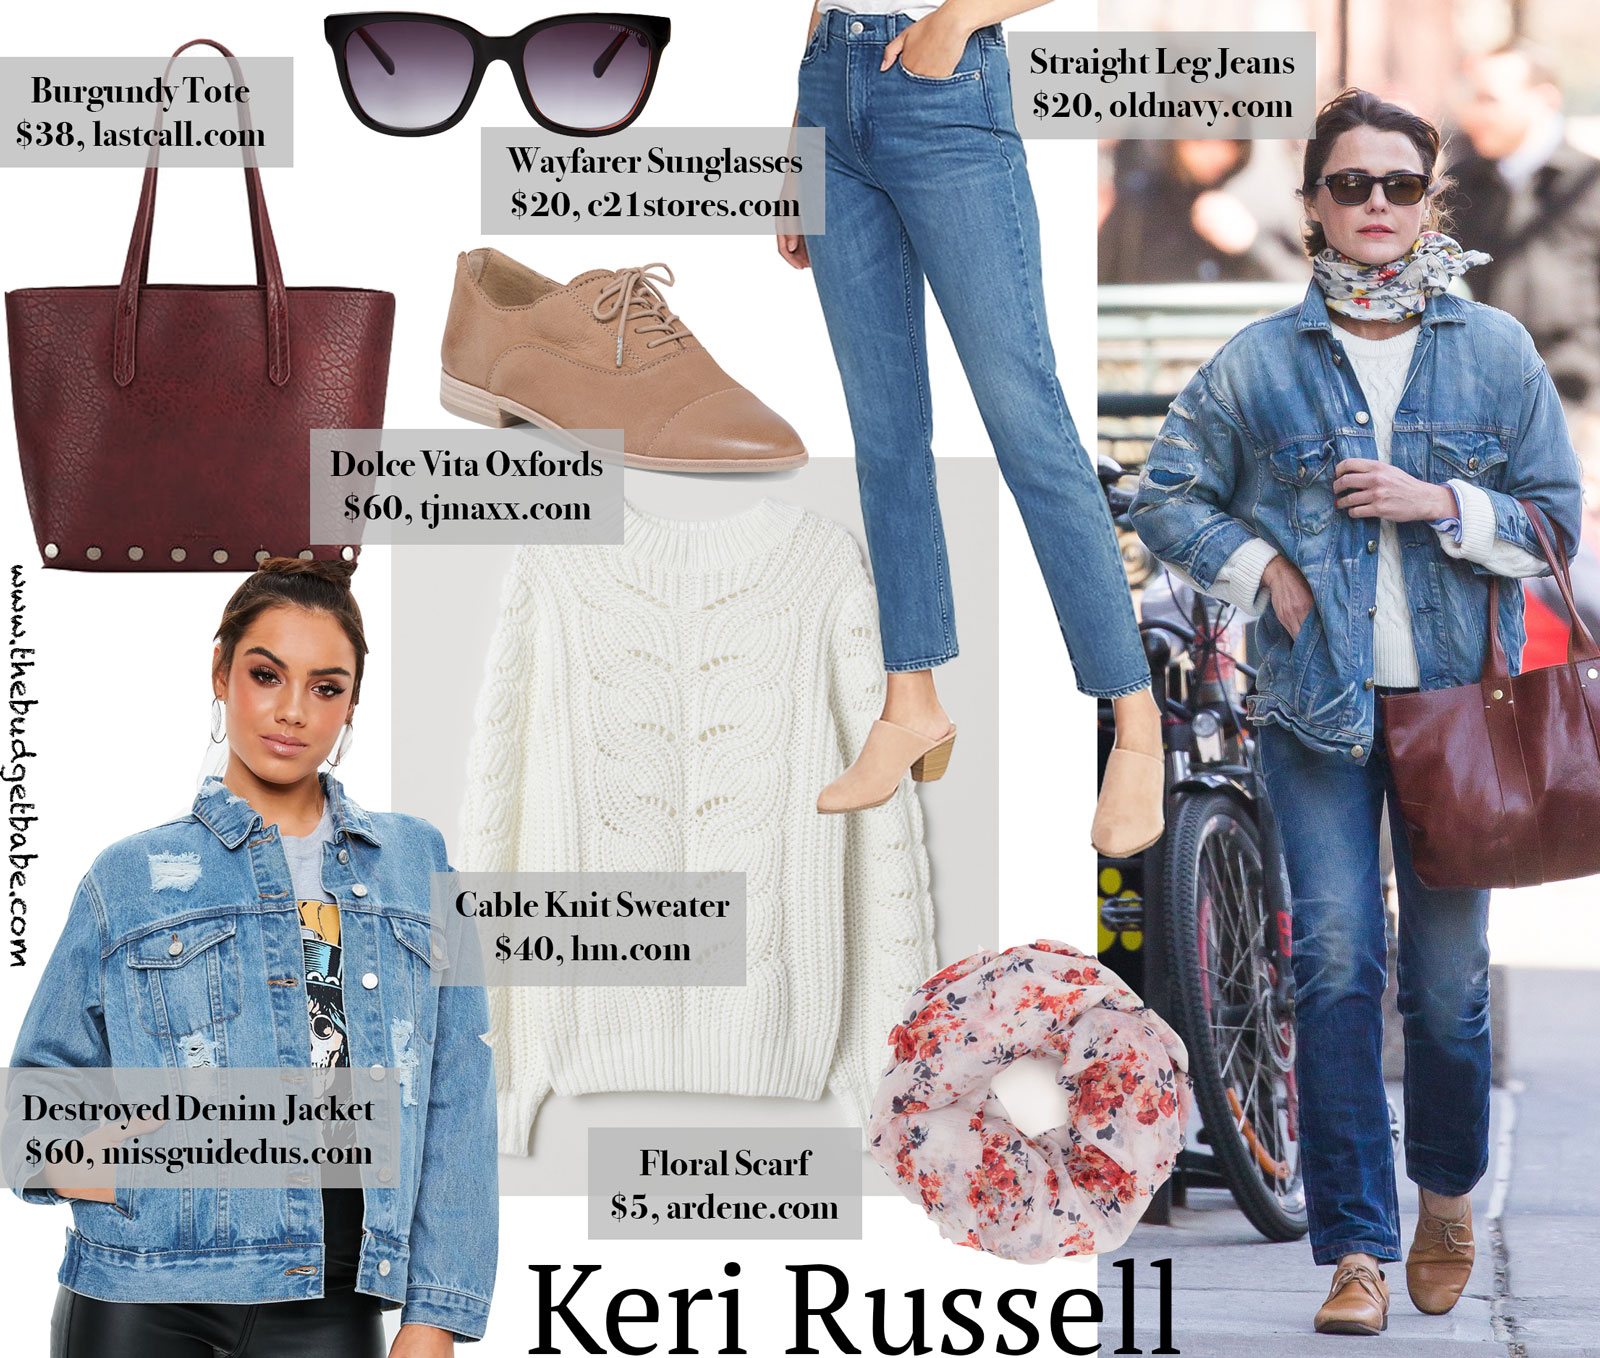 Keri Russell's Denim Jacket and Oxfords Look for Less